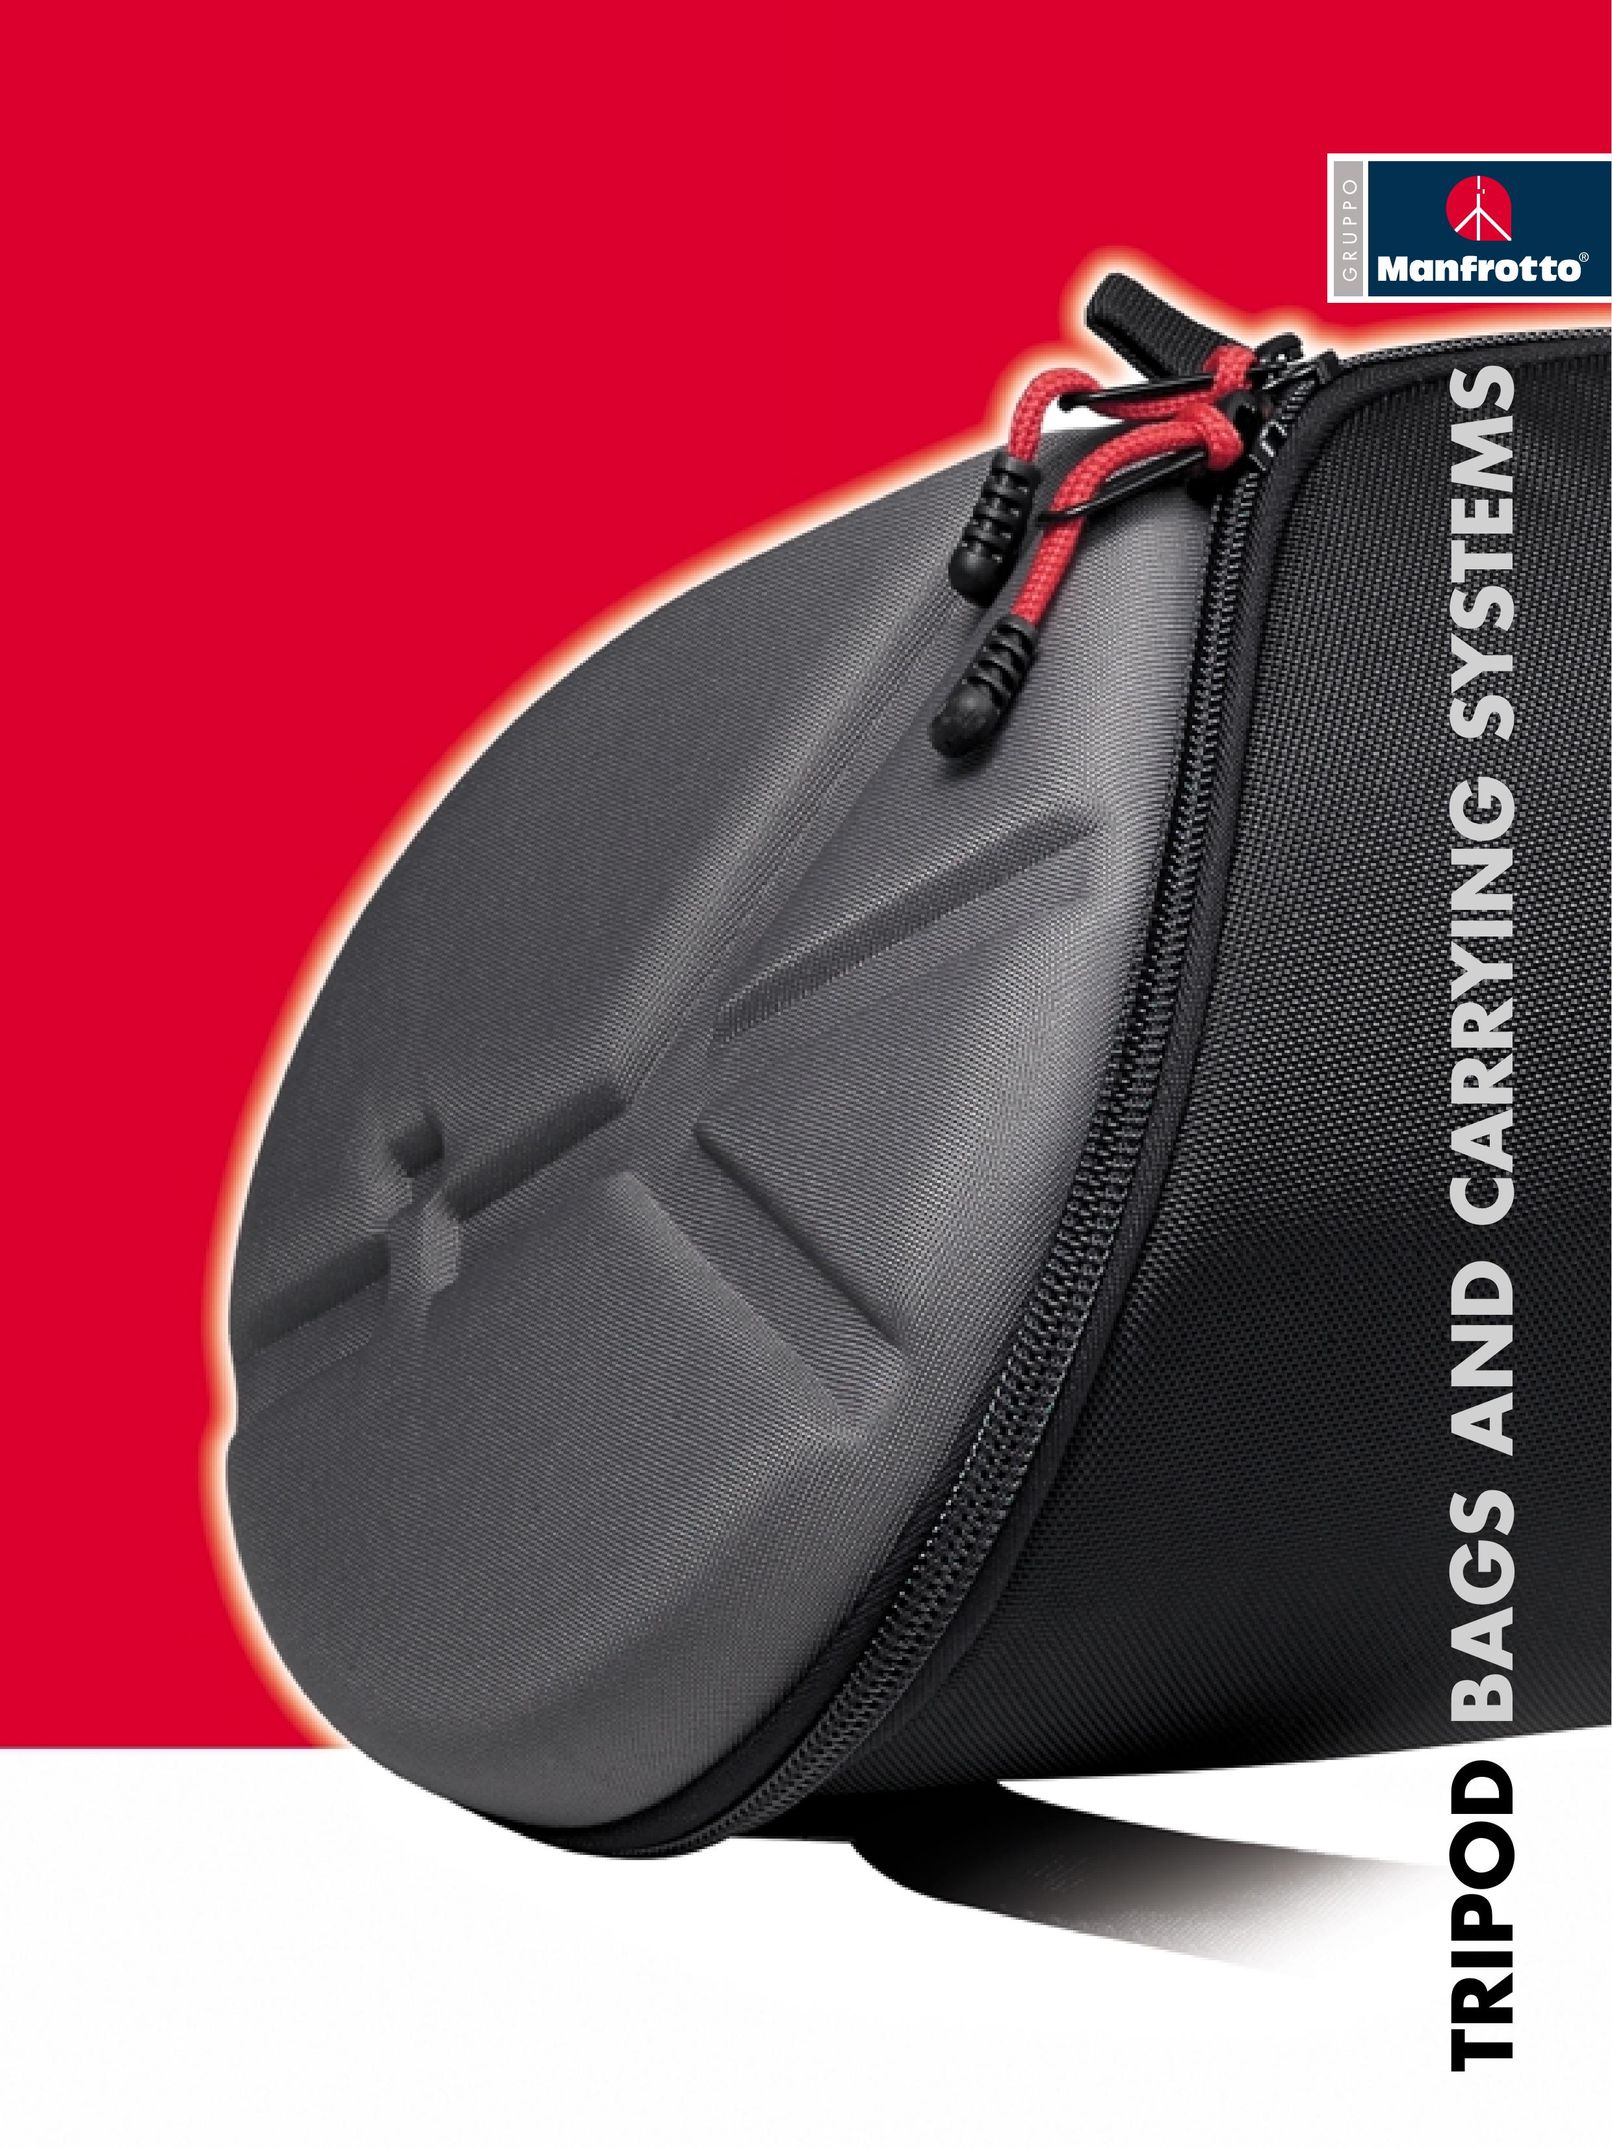 Manfrotto MBAG120P Carrying Case User Manual